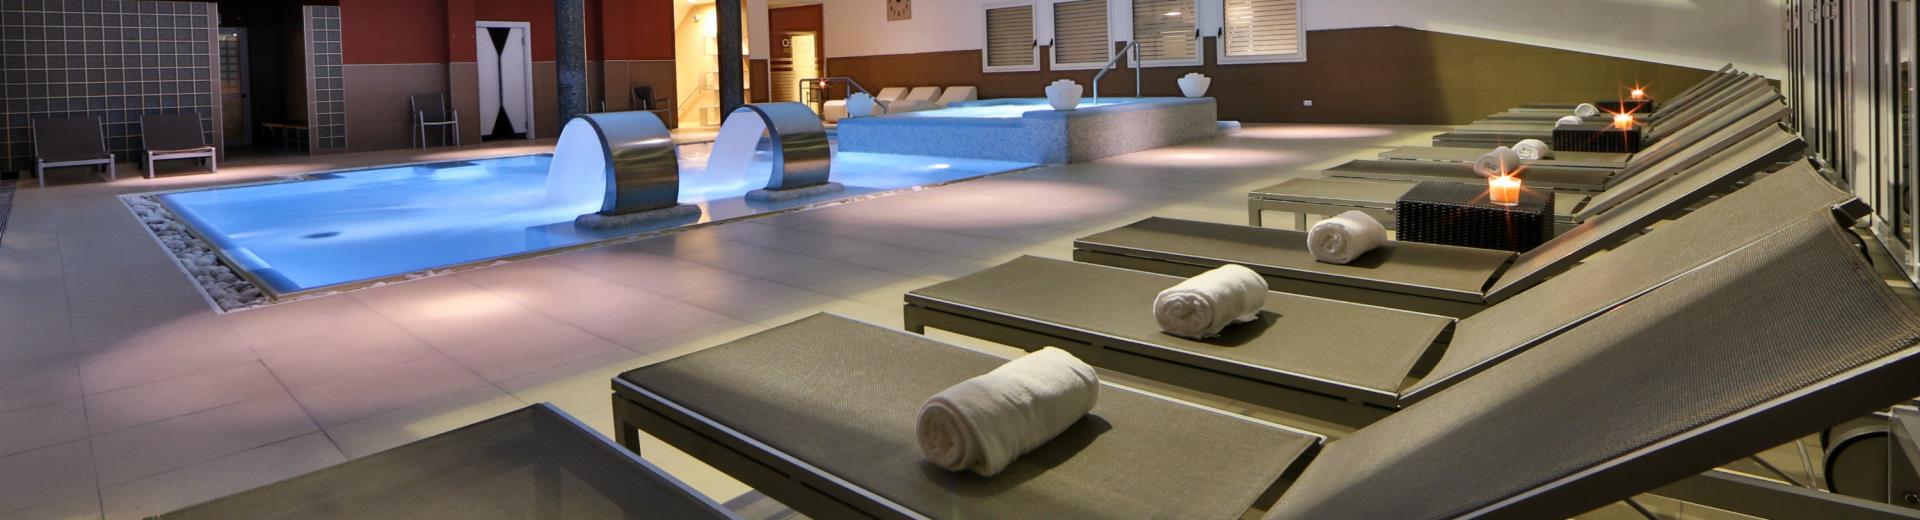 Dynamic heated swimming pool and spa: Book now!